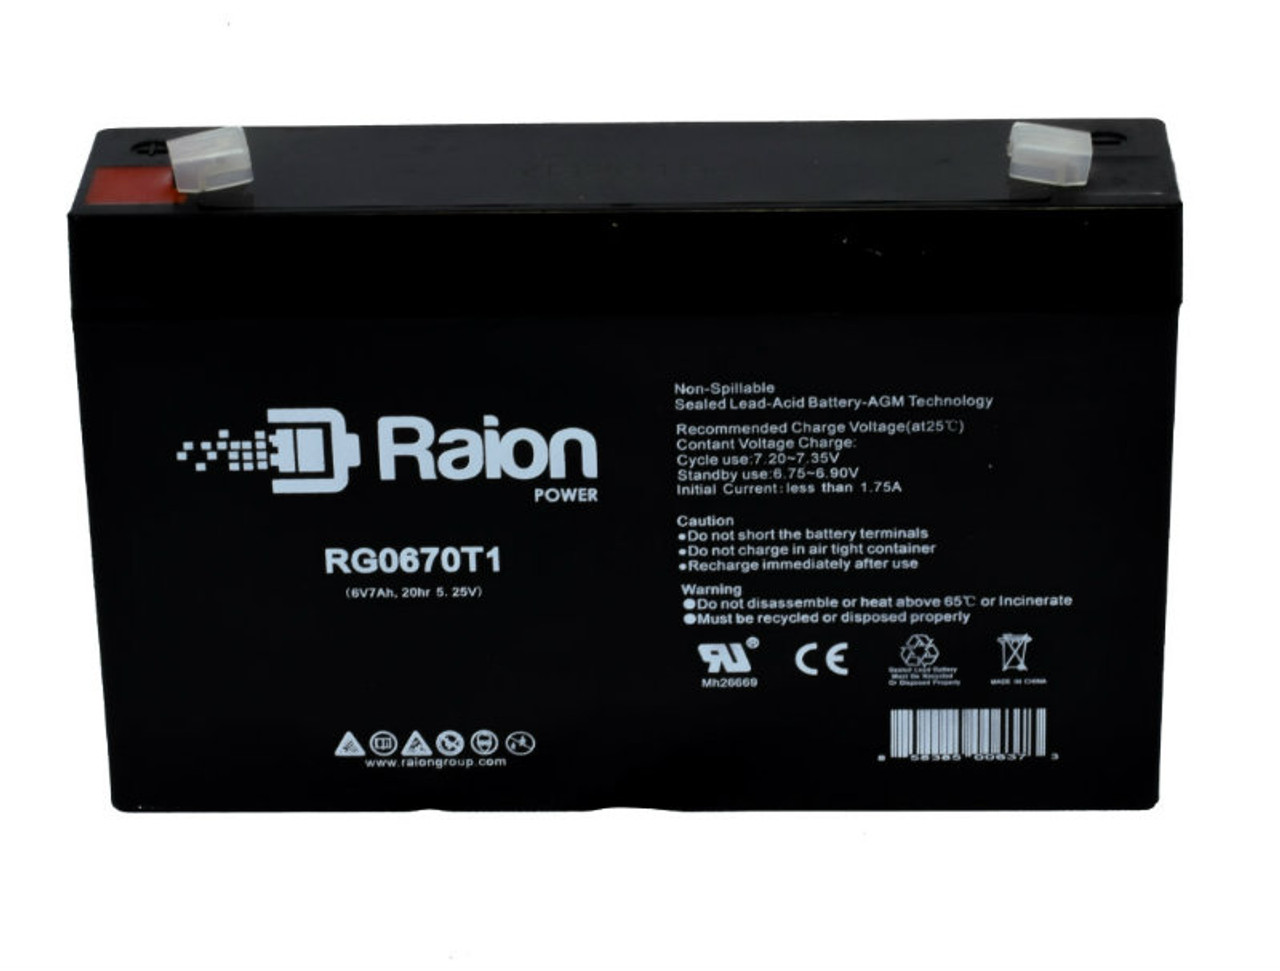 Raion Power RG0670T1 Replacement Battery Cartridge for Ivy Biomedical Systems 701 Monitor